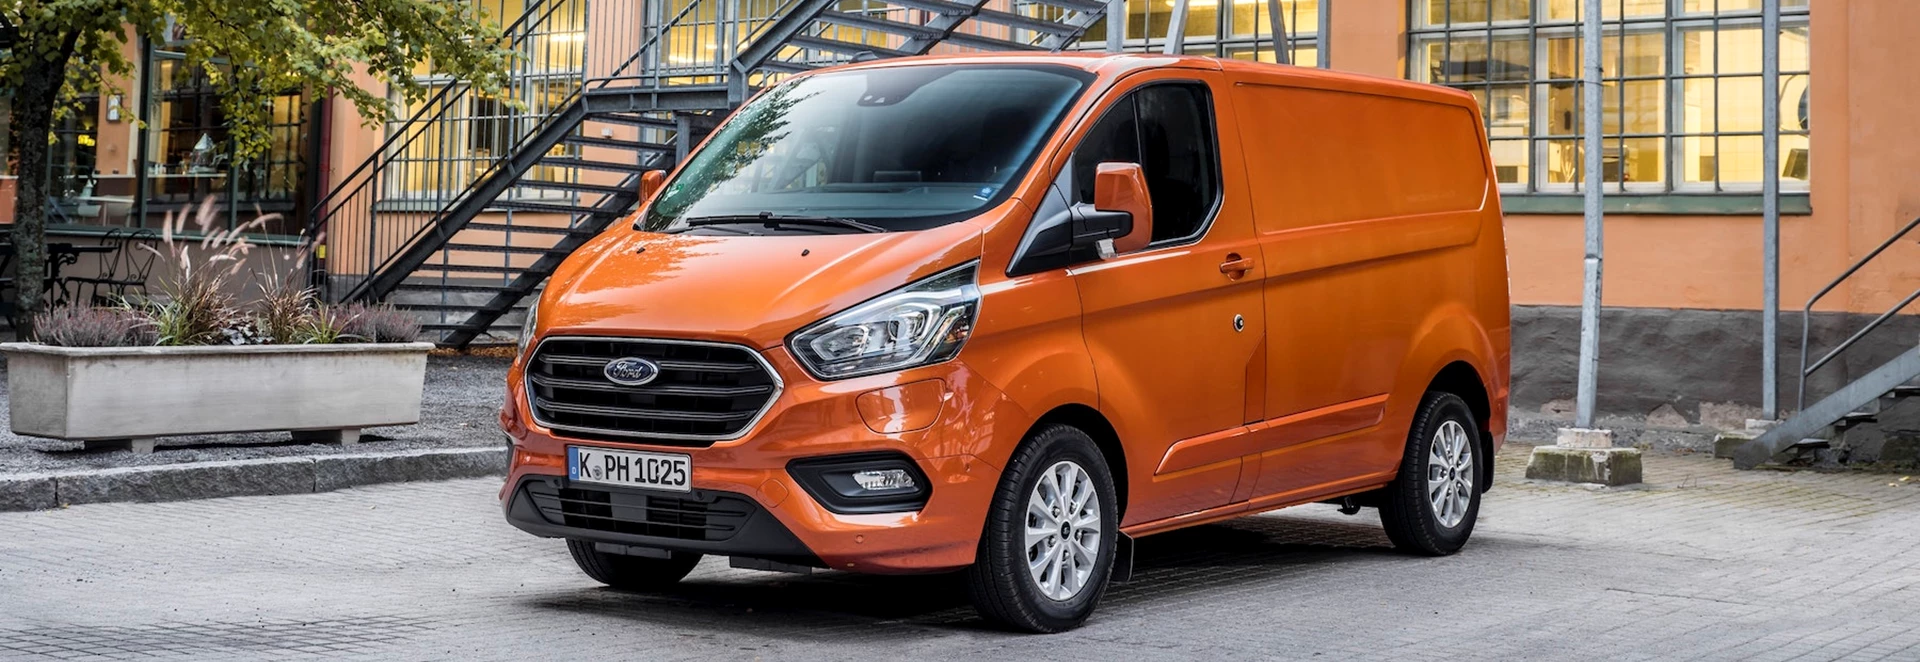 Ford Transit Custom Plug-in Hybrid comes with ‘geofencing’ to support air quality improvements 